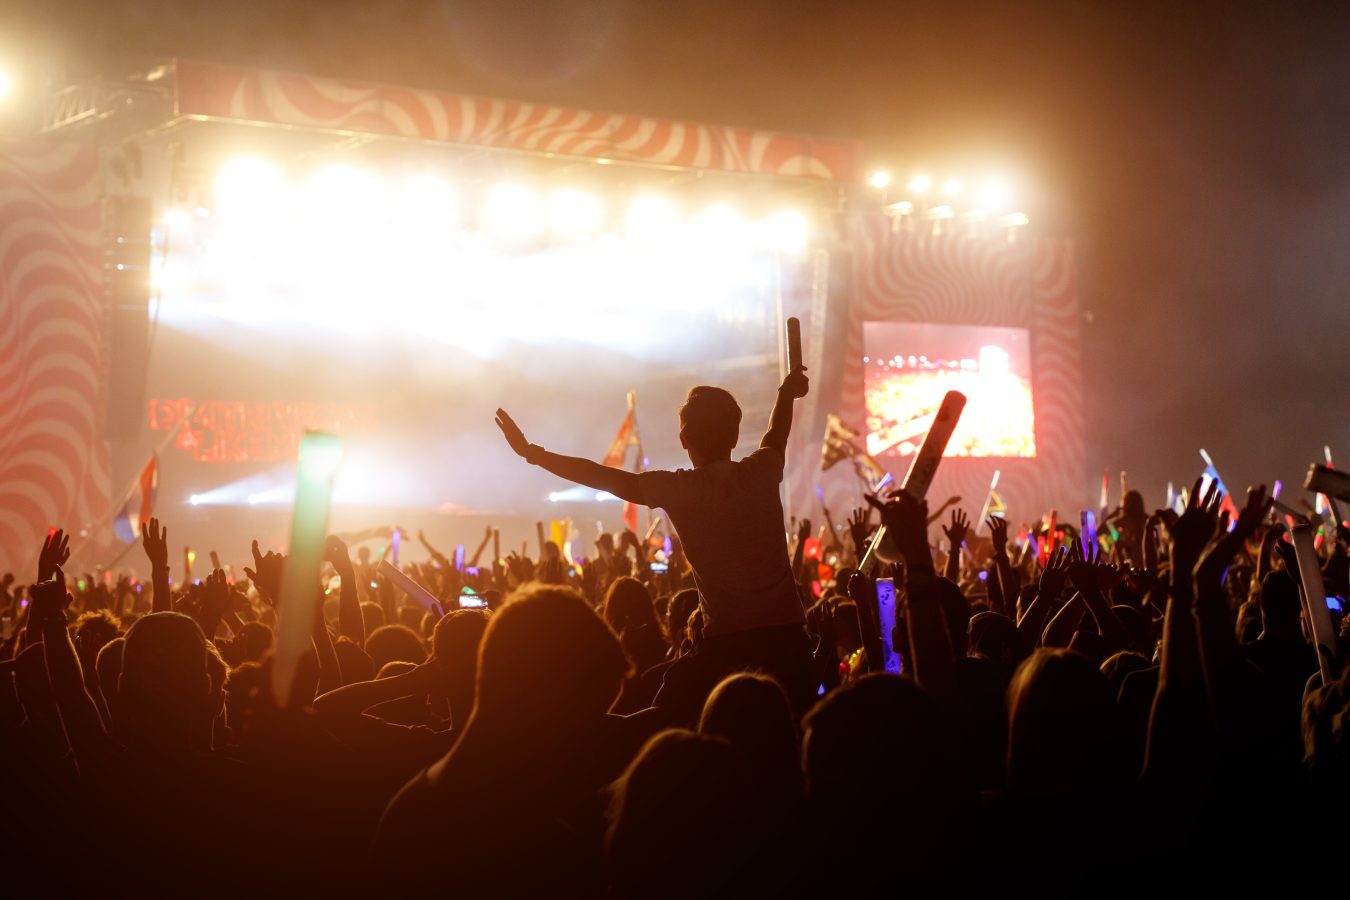 Silhouette of a young man above the crowd at a concert or big festival event.